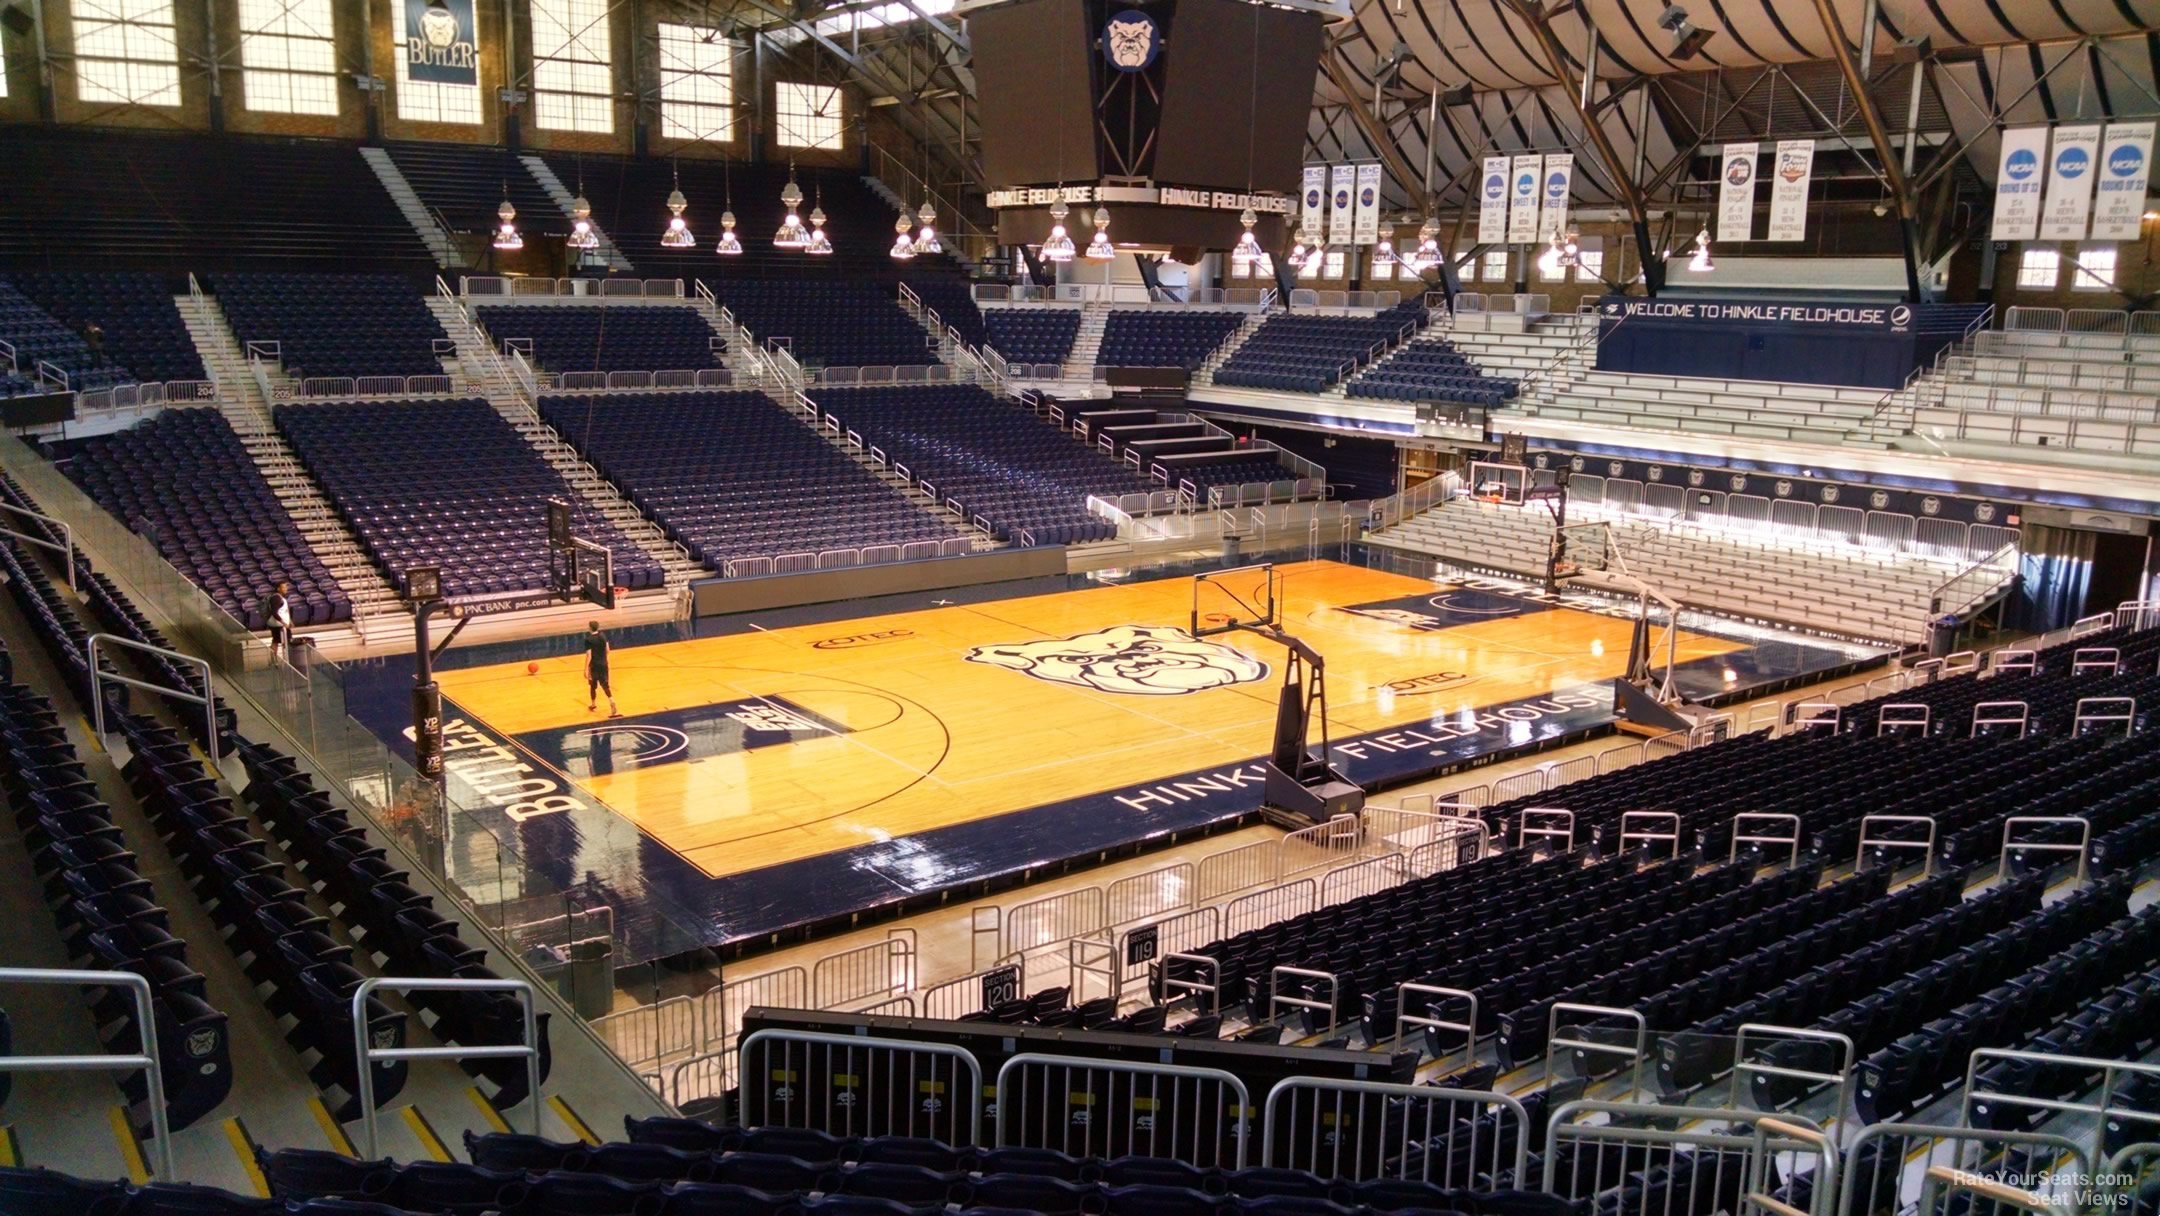 Hinkle Fieldhouse Section 221 - RateYourSeats.com